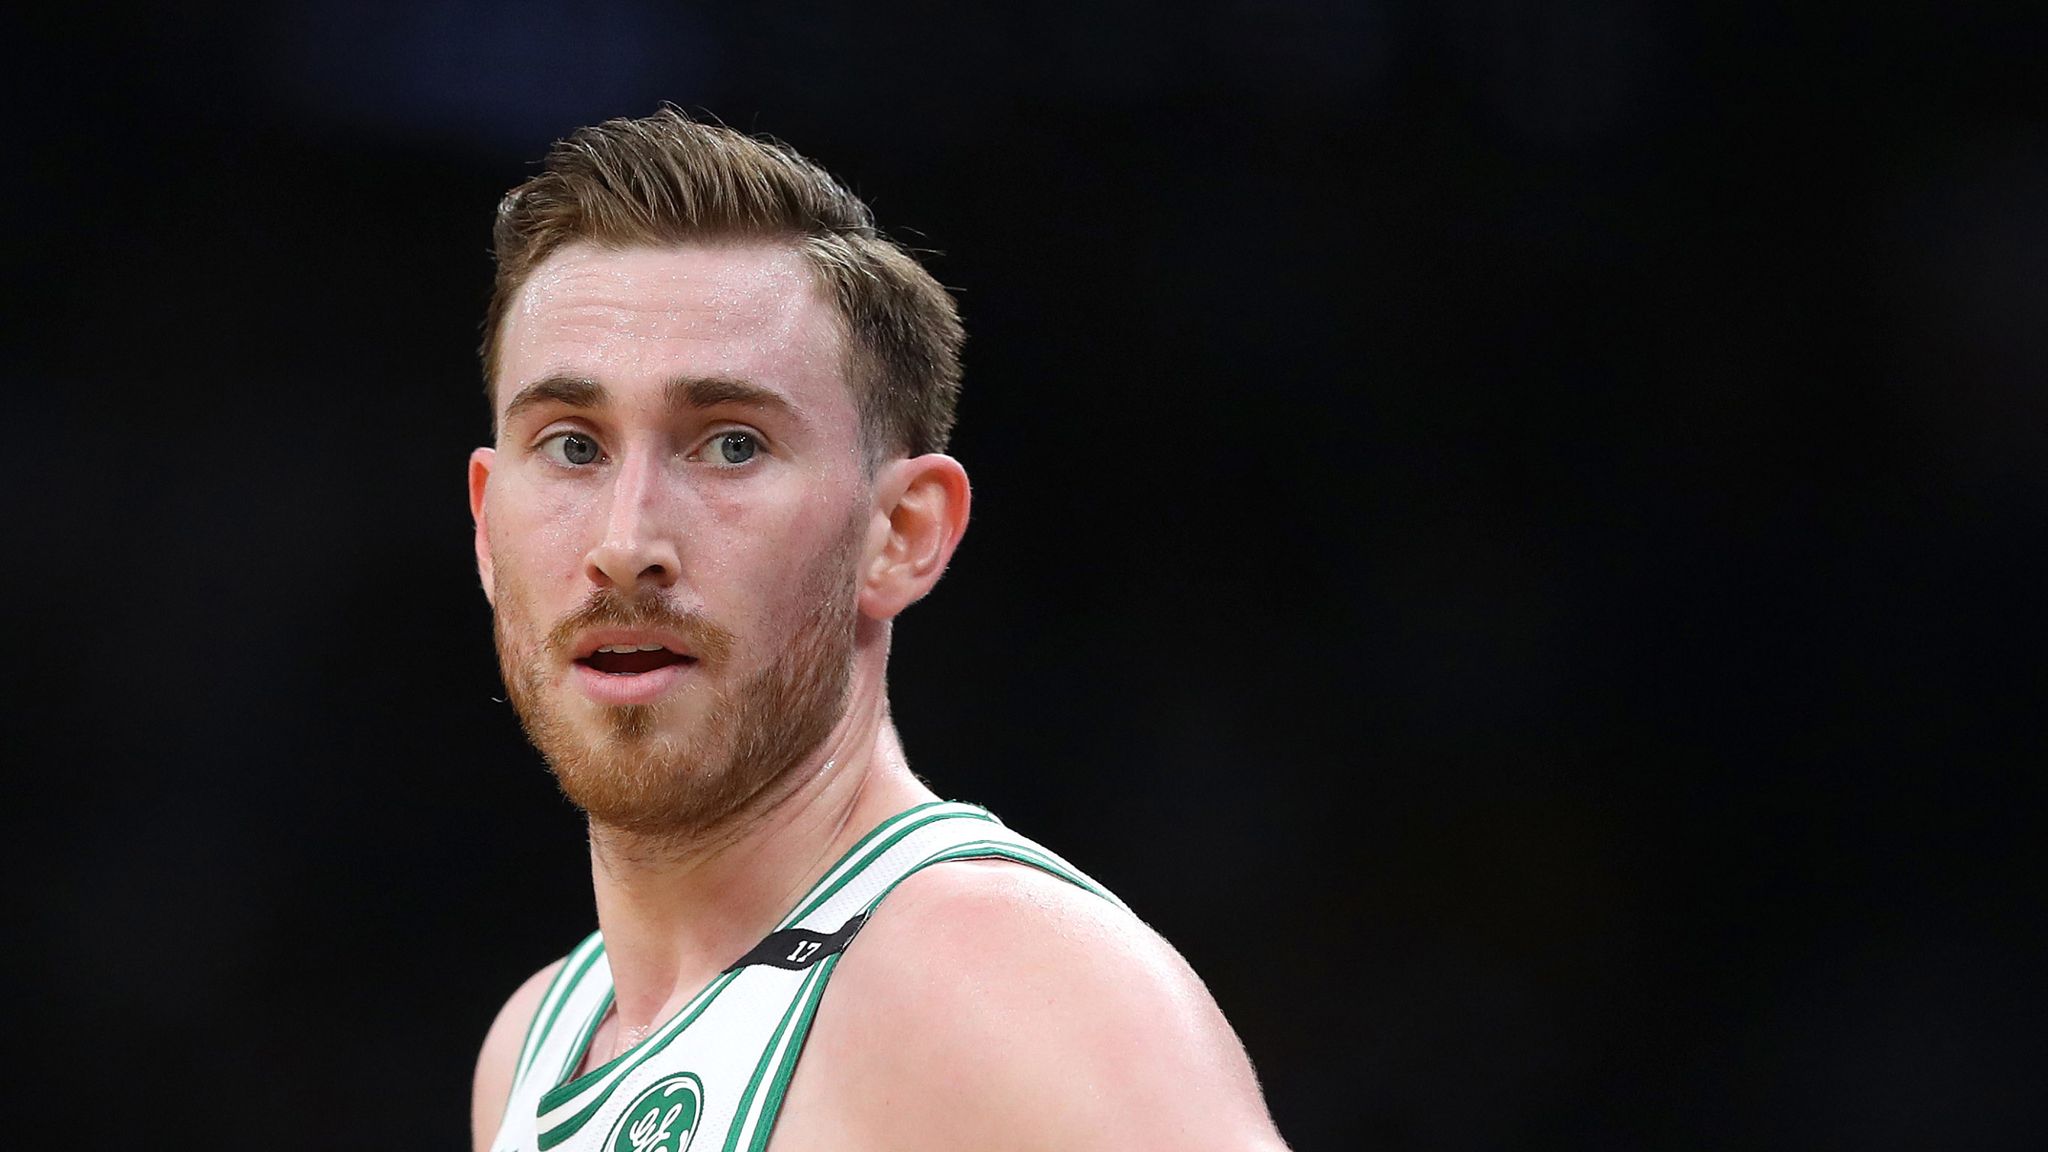 How Gordon Hayward's Latest Injury Could Affect The Celtics' Future